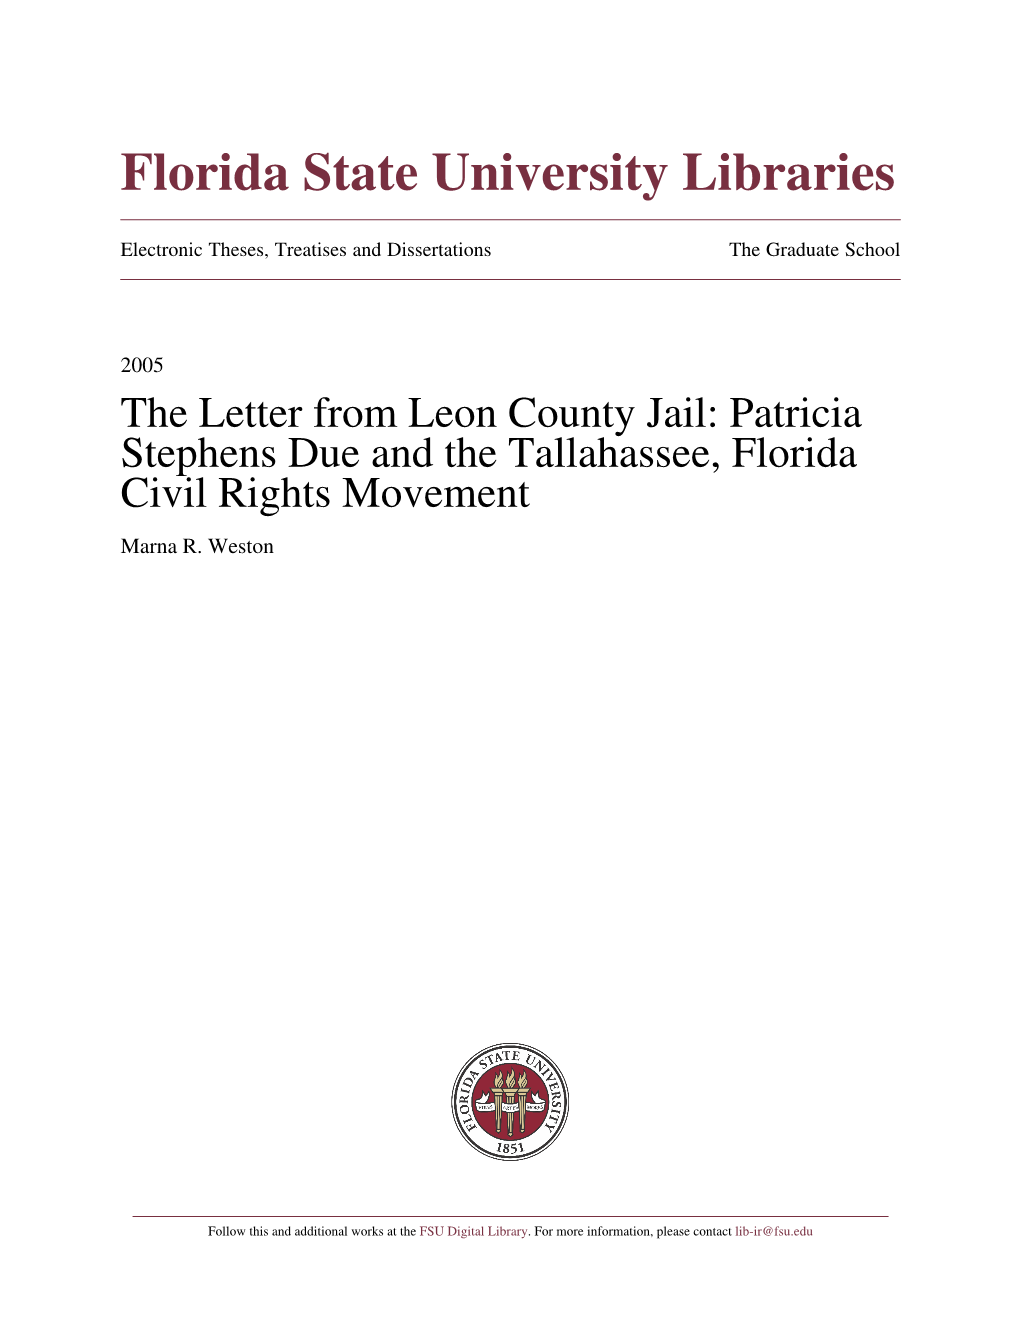 The Letter from Leon County Jail: Patricia Stephens Due and the Tallahassee, Florida Civil Rights Movement Marna R